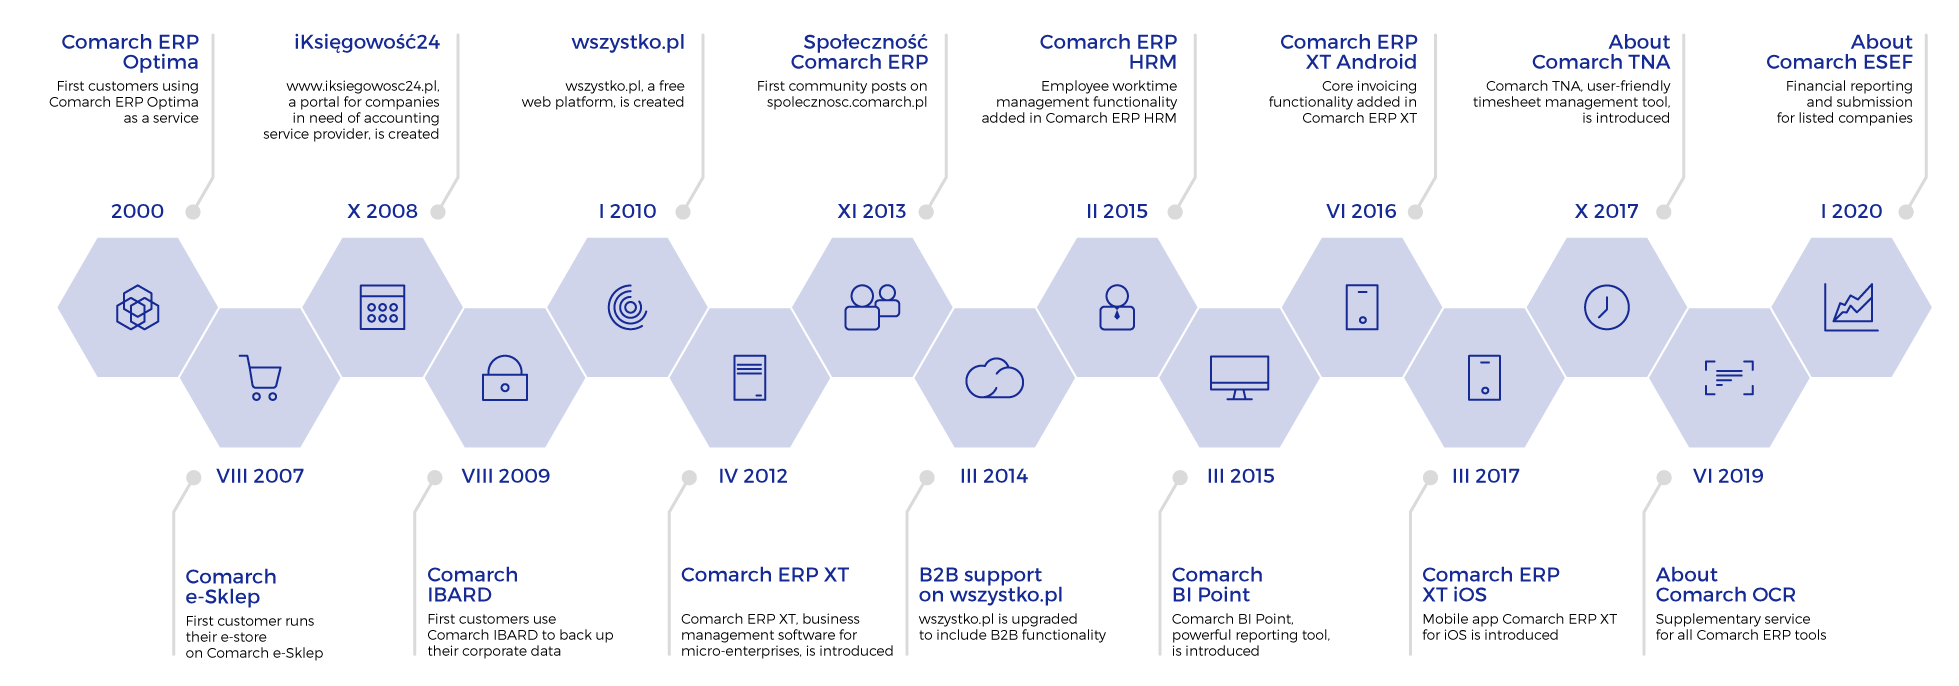 Timeline - comarch Cloud history dates back from 2000